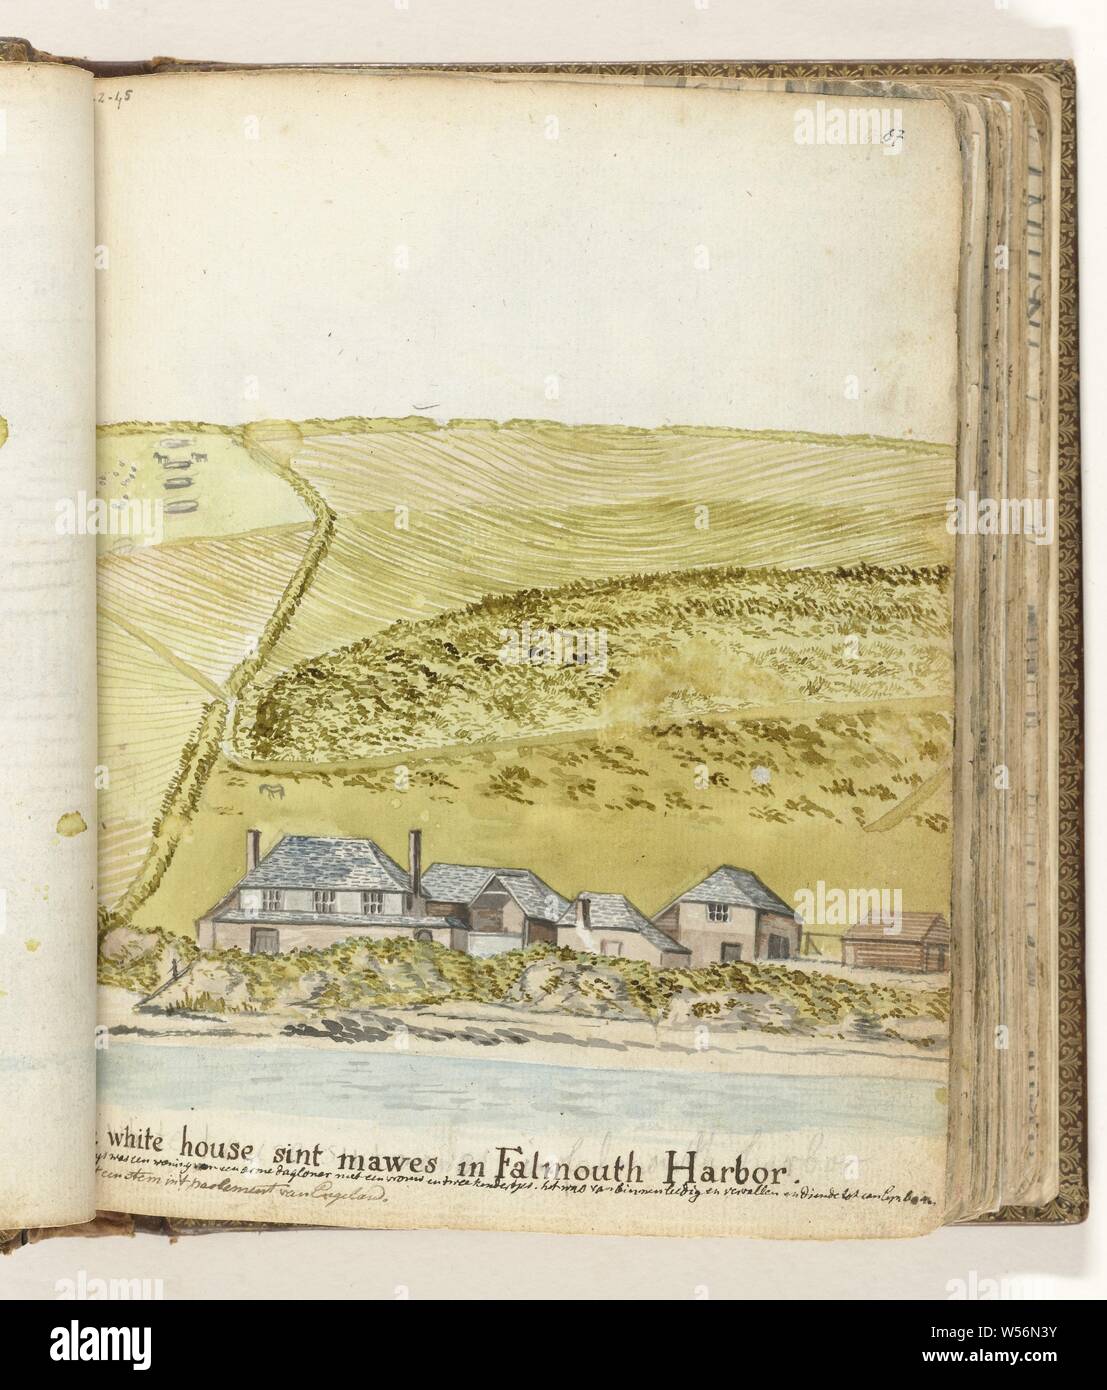 House in Falmouth harbor, Color drawing of a number of houses by the sea against a backdrop of a steep green coast. The drawing was made from the anchor of an old-fashioned Oostindievaarder 'Holland'. A sloop sails people ashore. With inscription. Part from the sketchbook by Jan Brandes, dl. 2 (1808), p. 67, Cornwall, Falmouth, Jan Brandes, Jun-1778, paper, pencil, brush, h 195 mm × w 155 mm Stock Photo